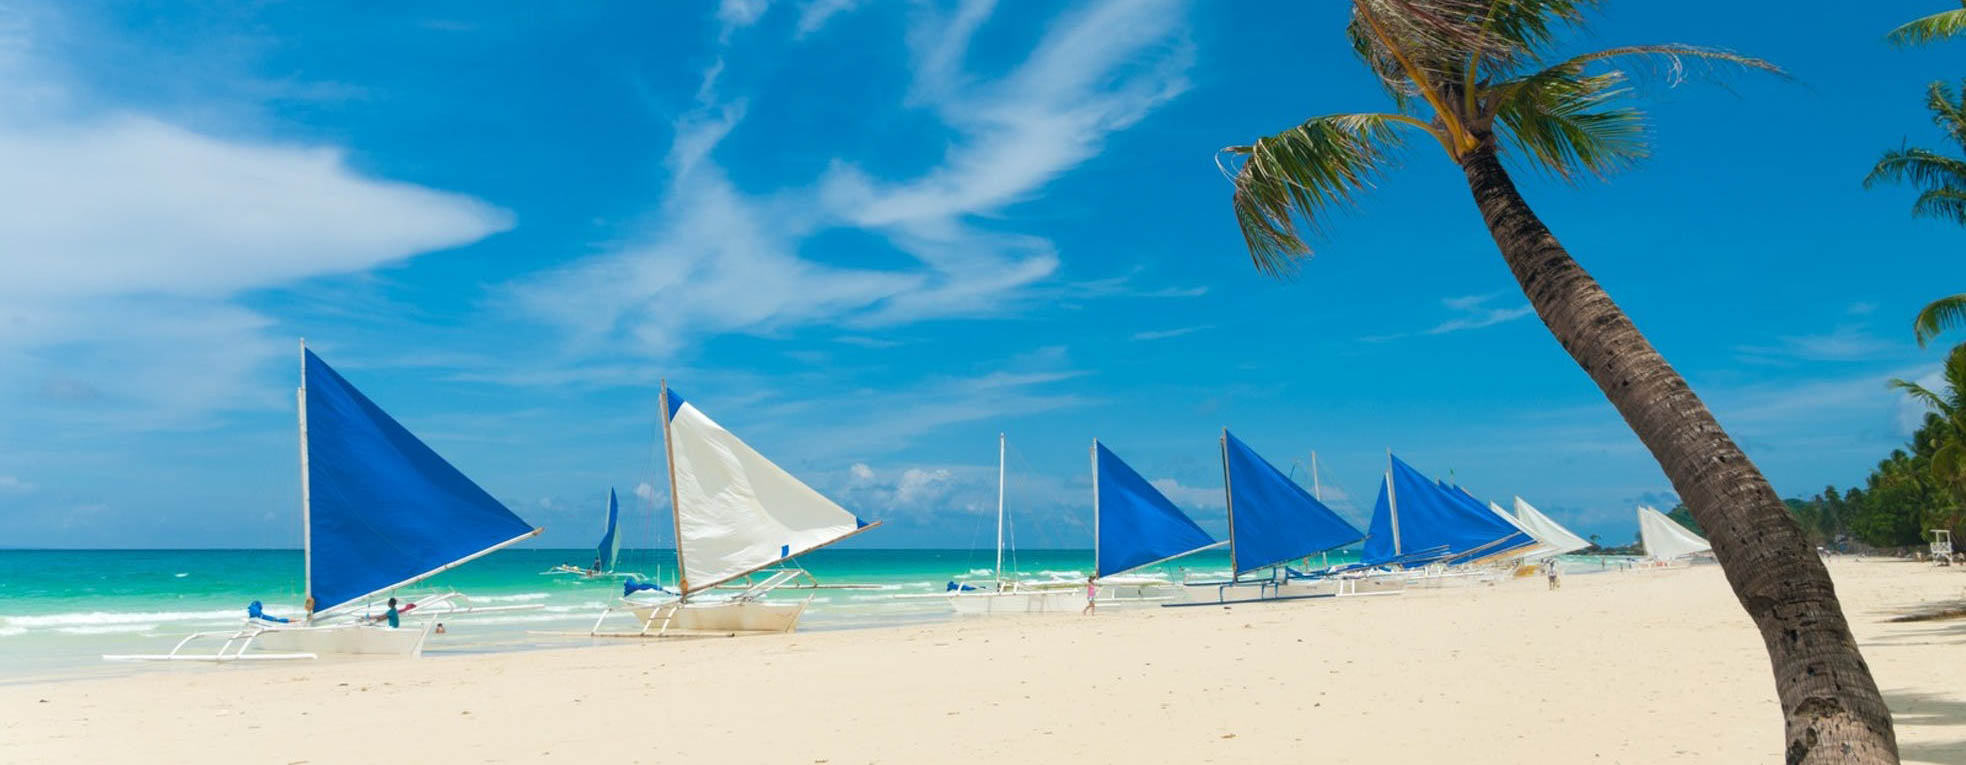 Paraw Sailing Boats for day time activities in Boracay Island